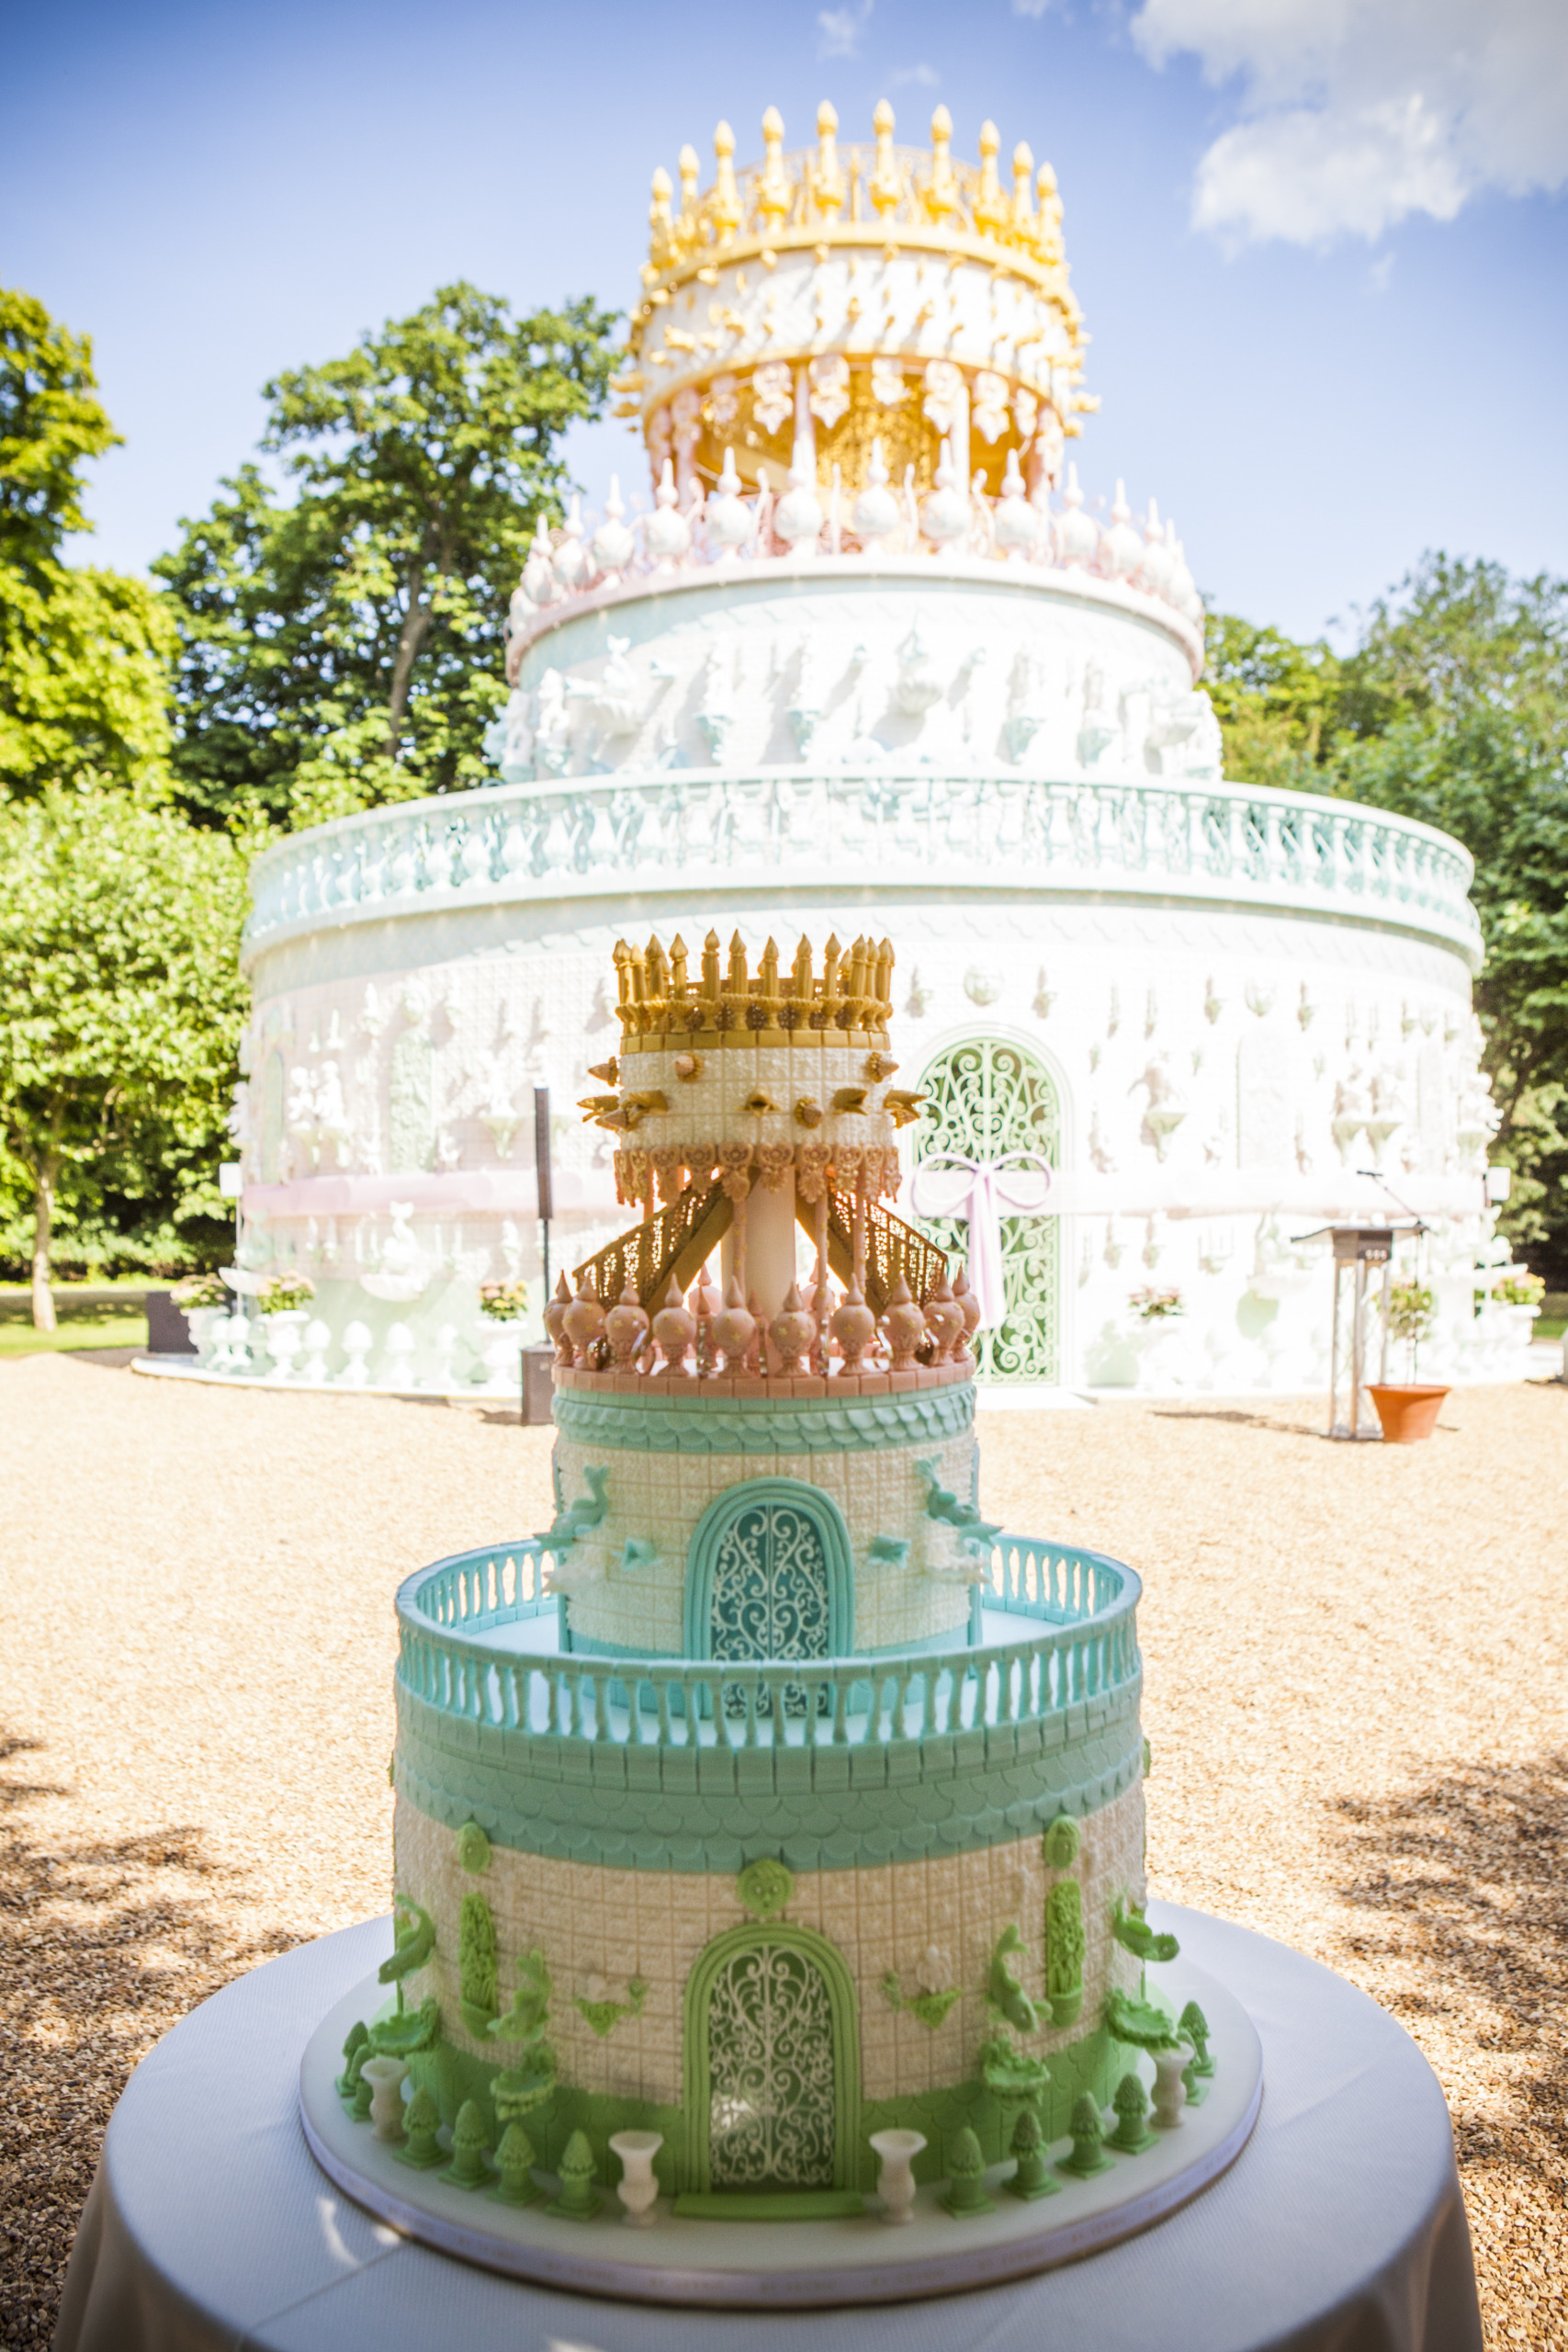 The Wedding Cake By Yevnig sits in front of the Wedding Cake Folly, by Joana Vasconcelos at Waddesdon Manor